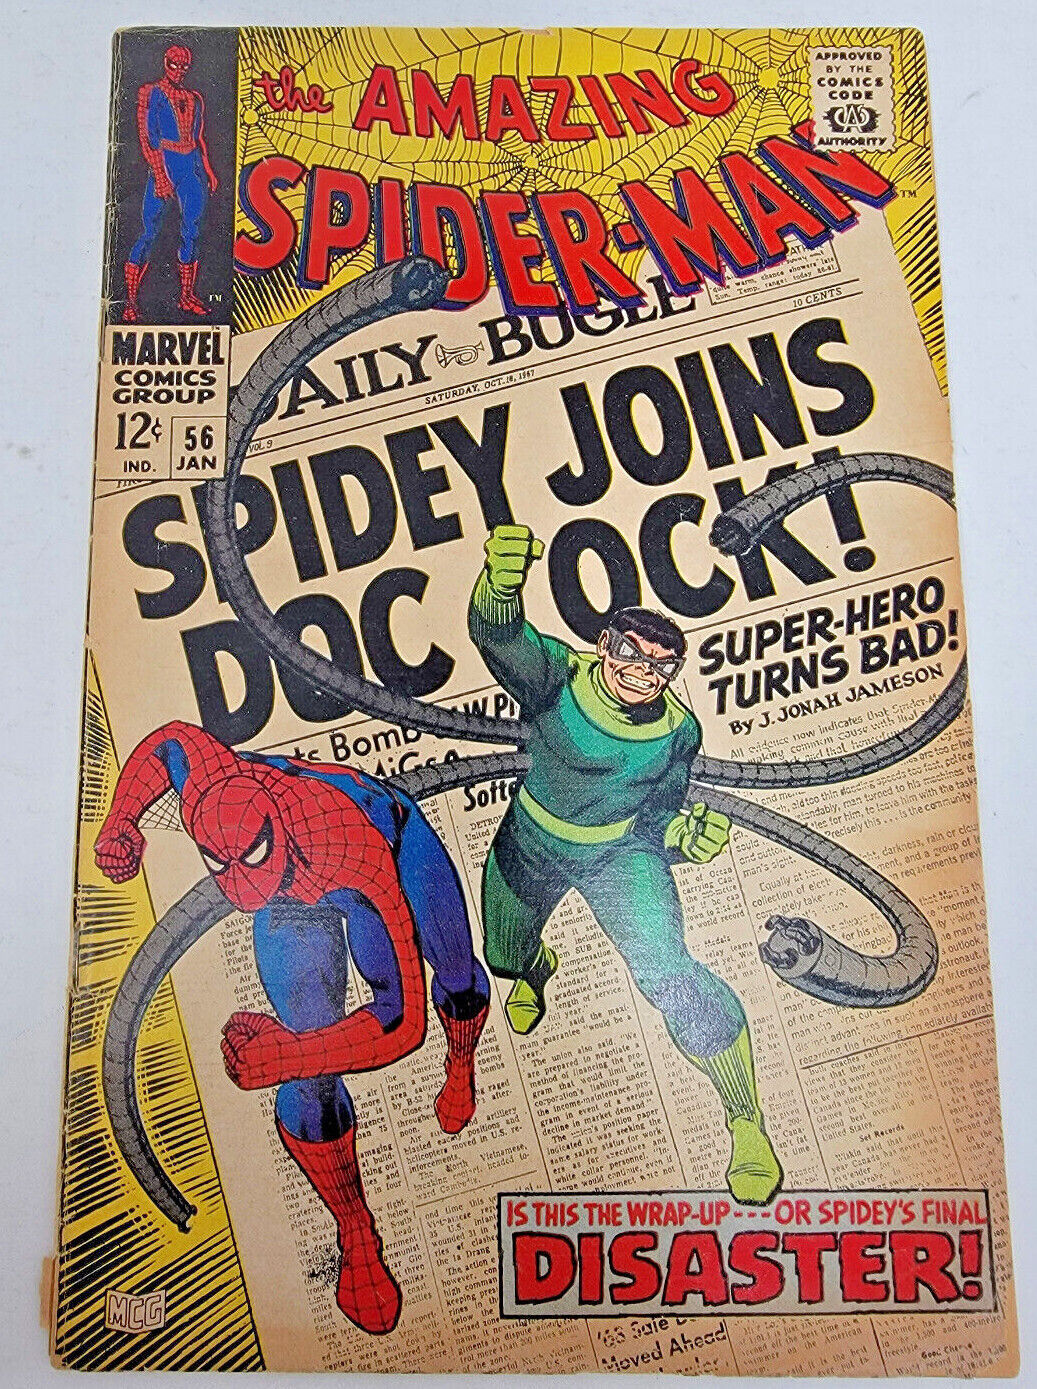 AMAZING SPIDER-MAN #56 CAPTAIN GEORGE STACY 1ST APPEARANCE *1968* 4.5